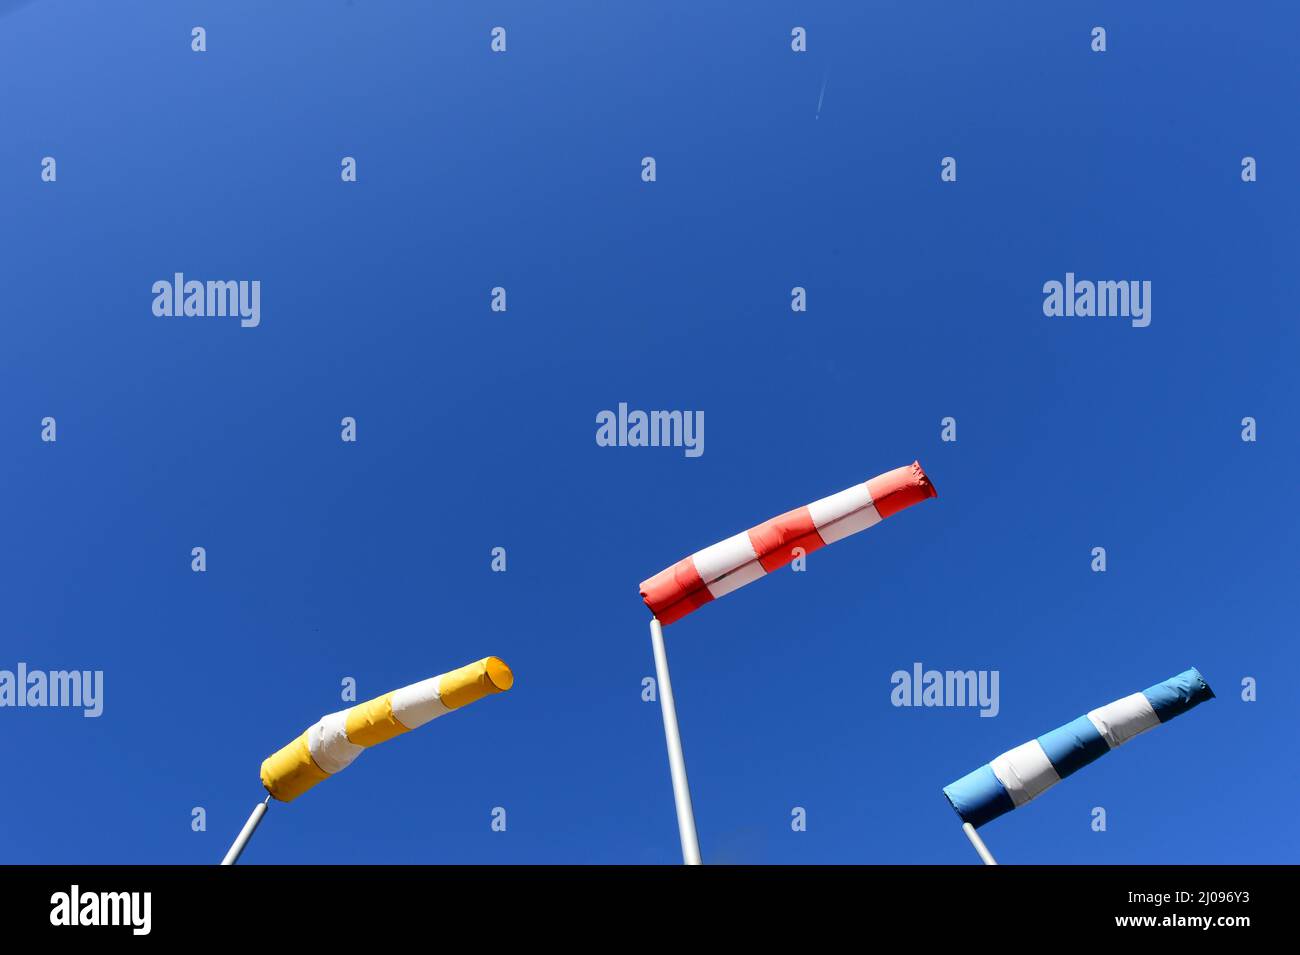 Three windsocks in yellow, red and blue with white stripes rectified in the same direction in clear blue sky Stock Photo